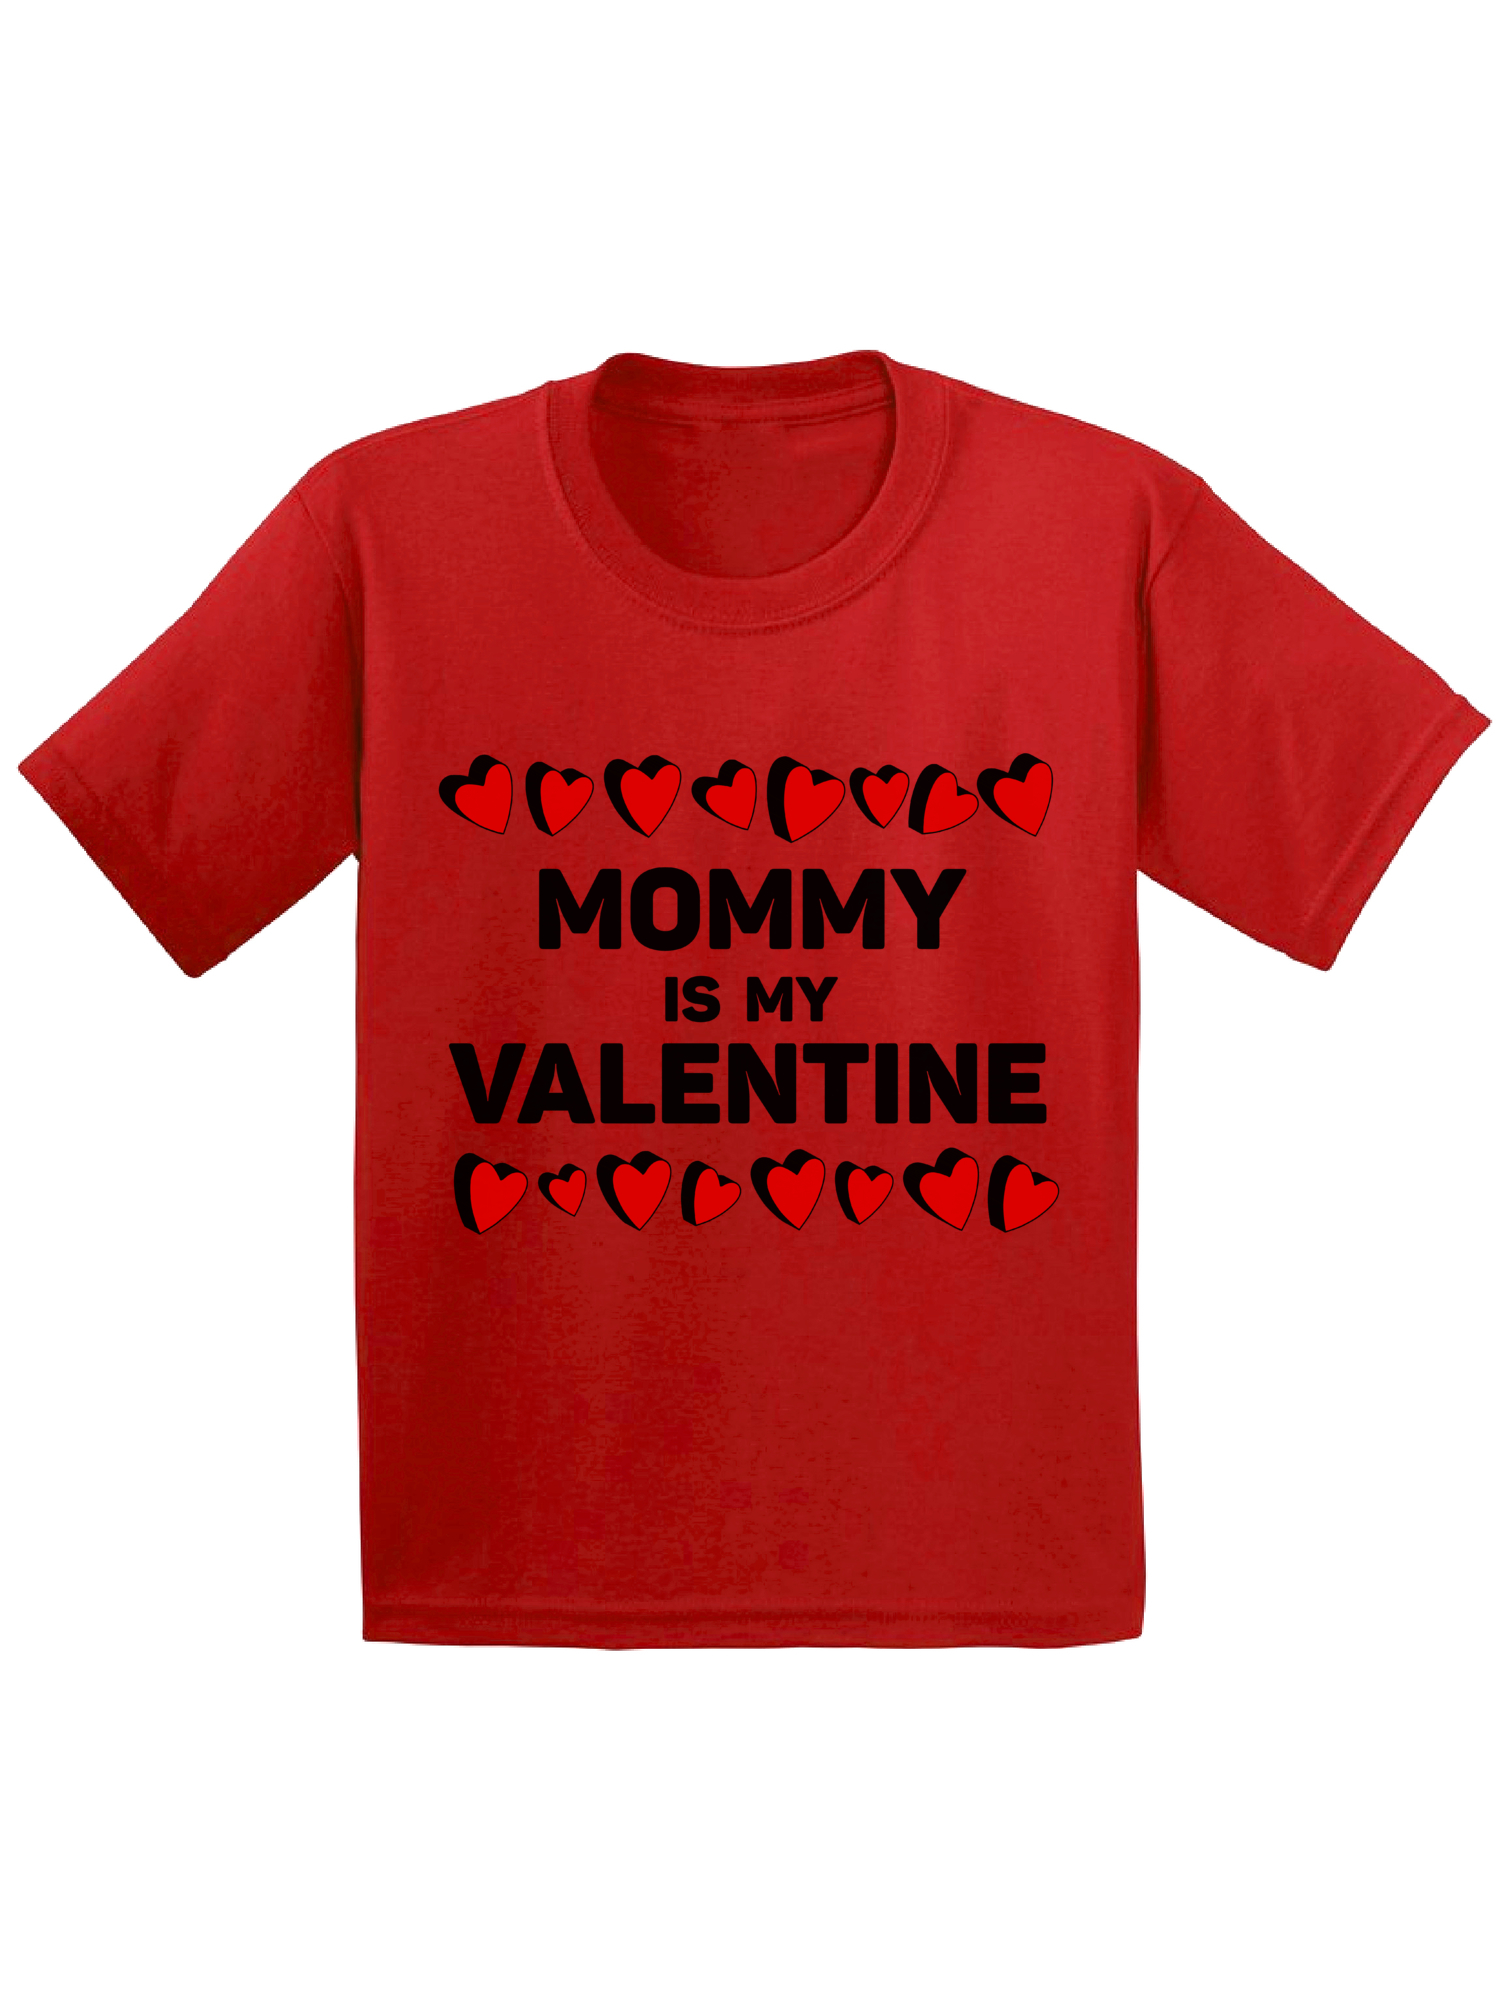 Awkward Styles Mommy is My Valentine Tshirt for Toddler Boys Cute Gifts for Boys Mom Boys Valentine Shirt Funny Valentines Tshirt for Toddler Boys Valentine Gifts for Kids Cute Mama's Boy Shirt - image 1 of 4